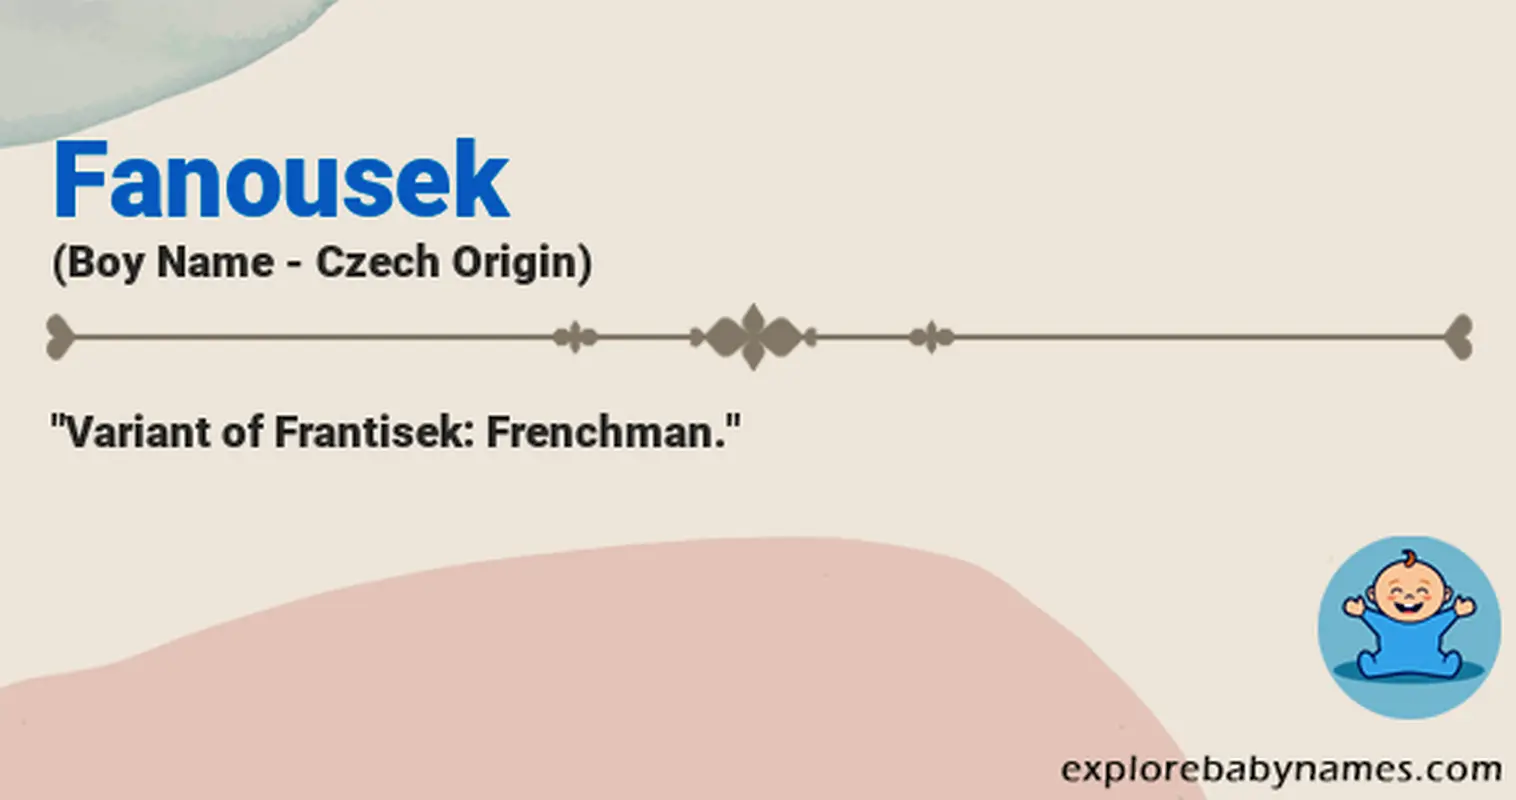 Meaning of Fanousek